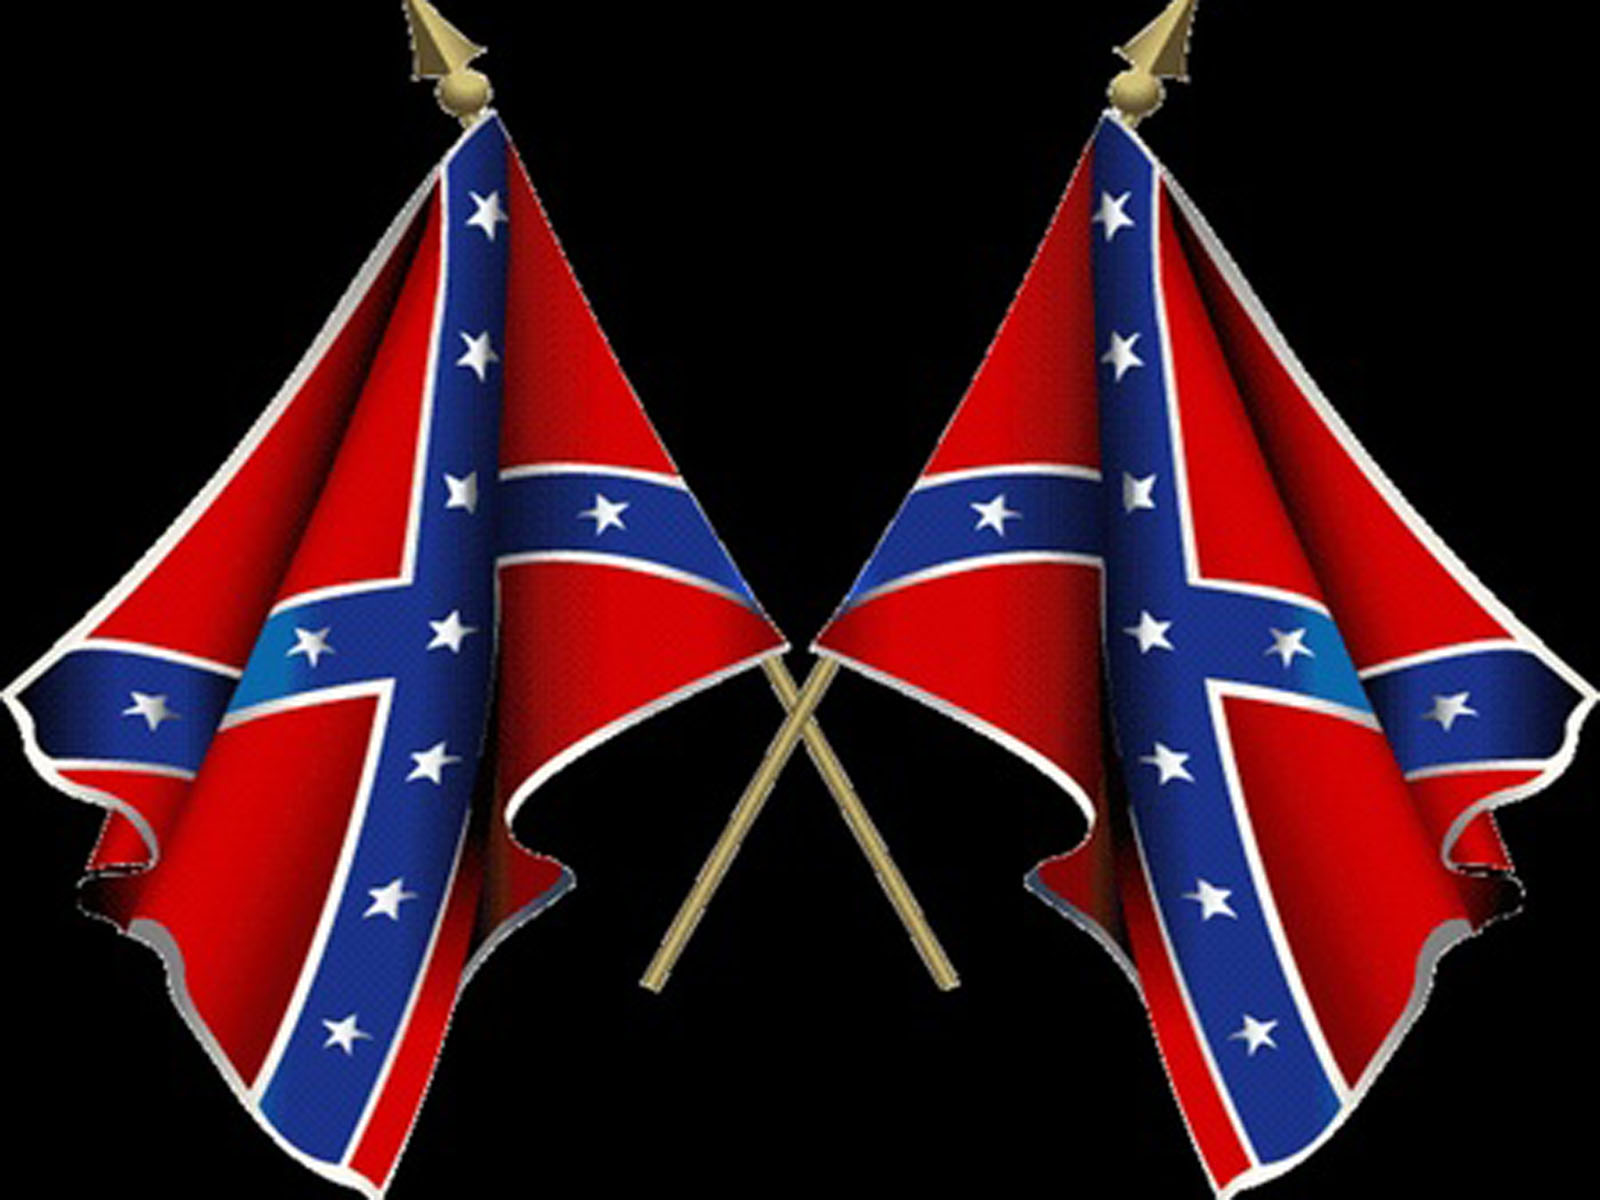 Read This Article The Texas Confederate Flag Wallpaper And Rebel